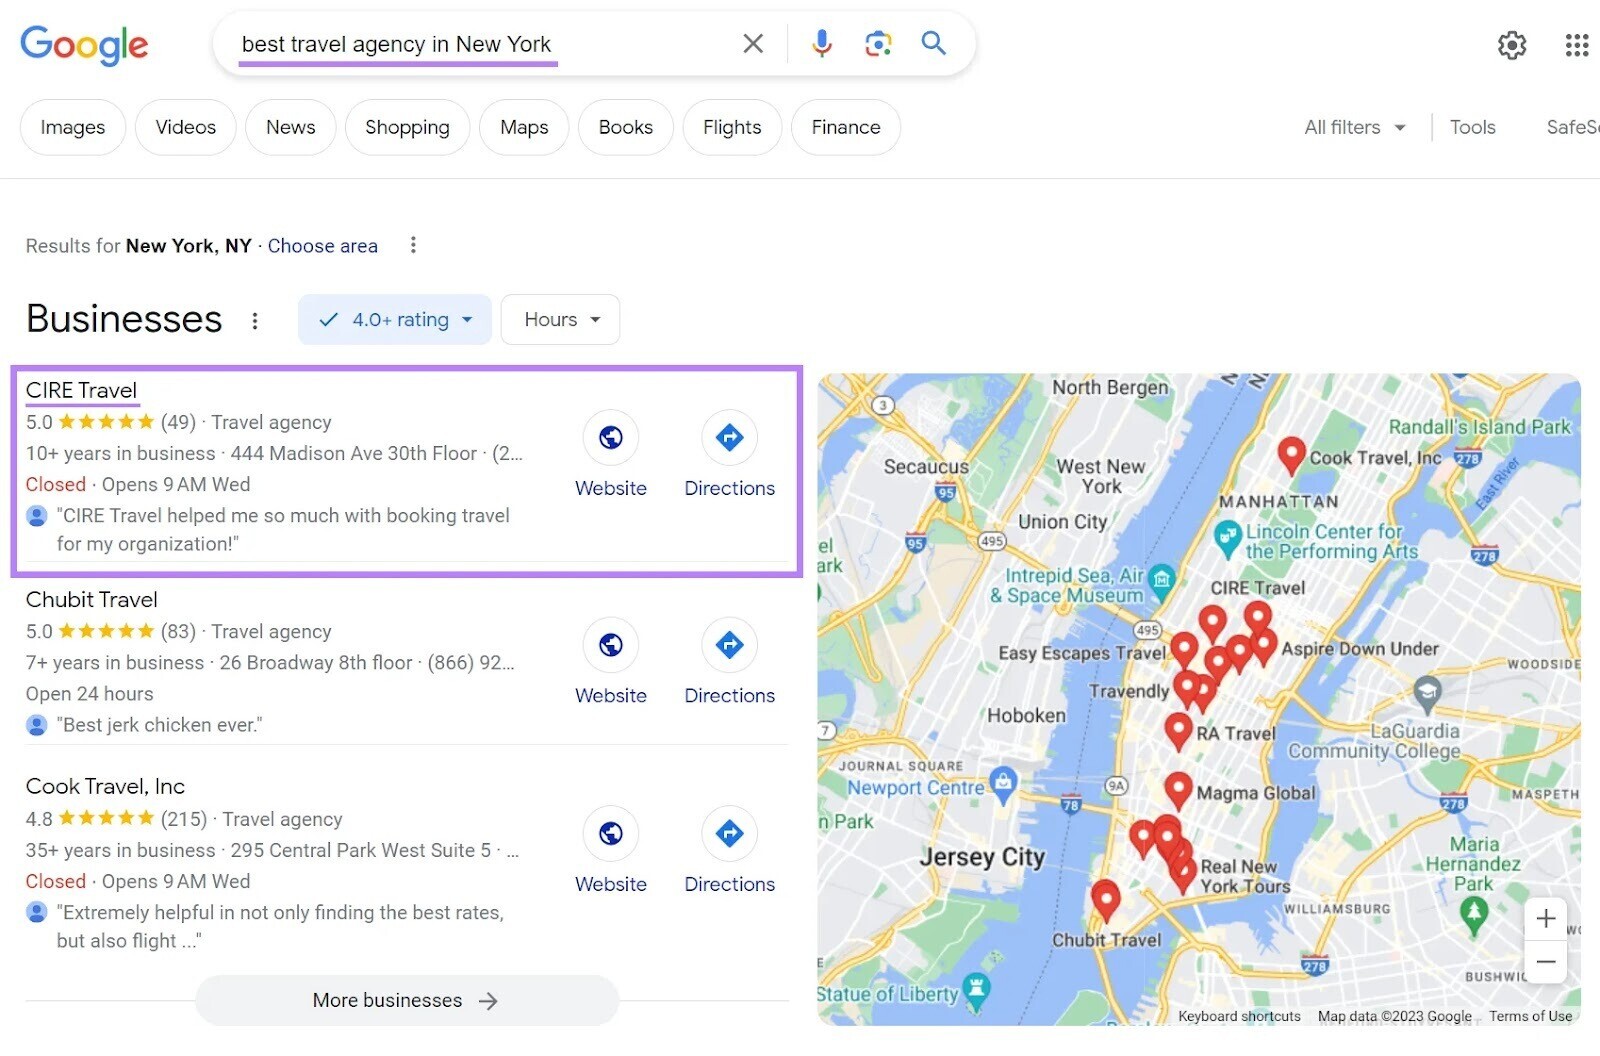 CIRE Travel is the first results for “best travel agency in New York” query